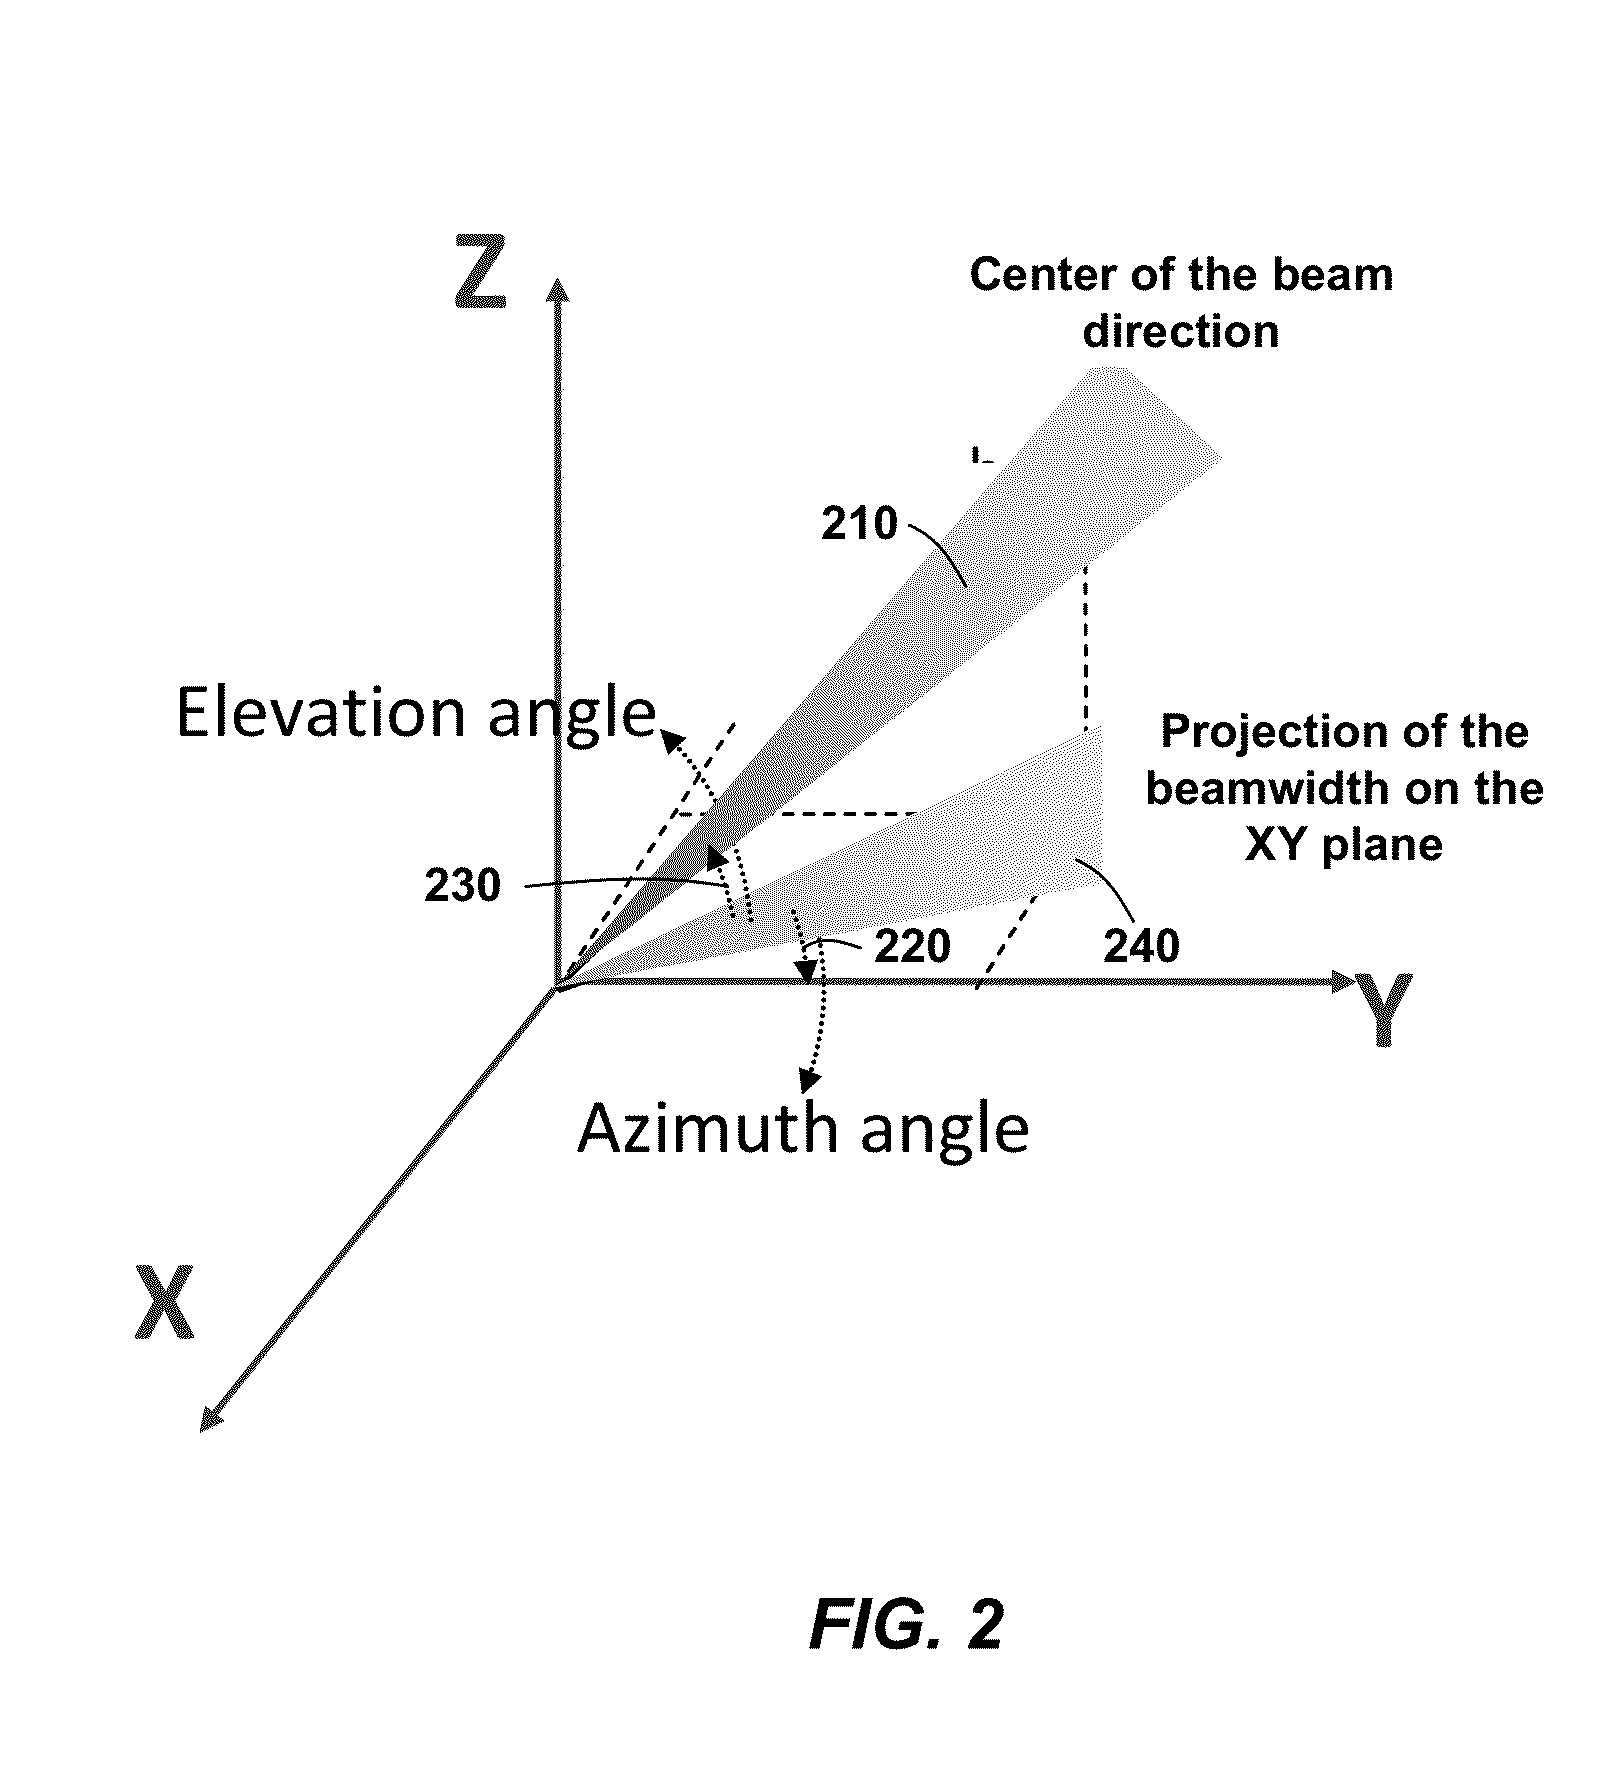 Methods and apparatuses for echo cancelation with beamforming microphone arrays